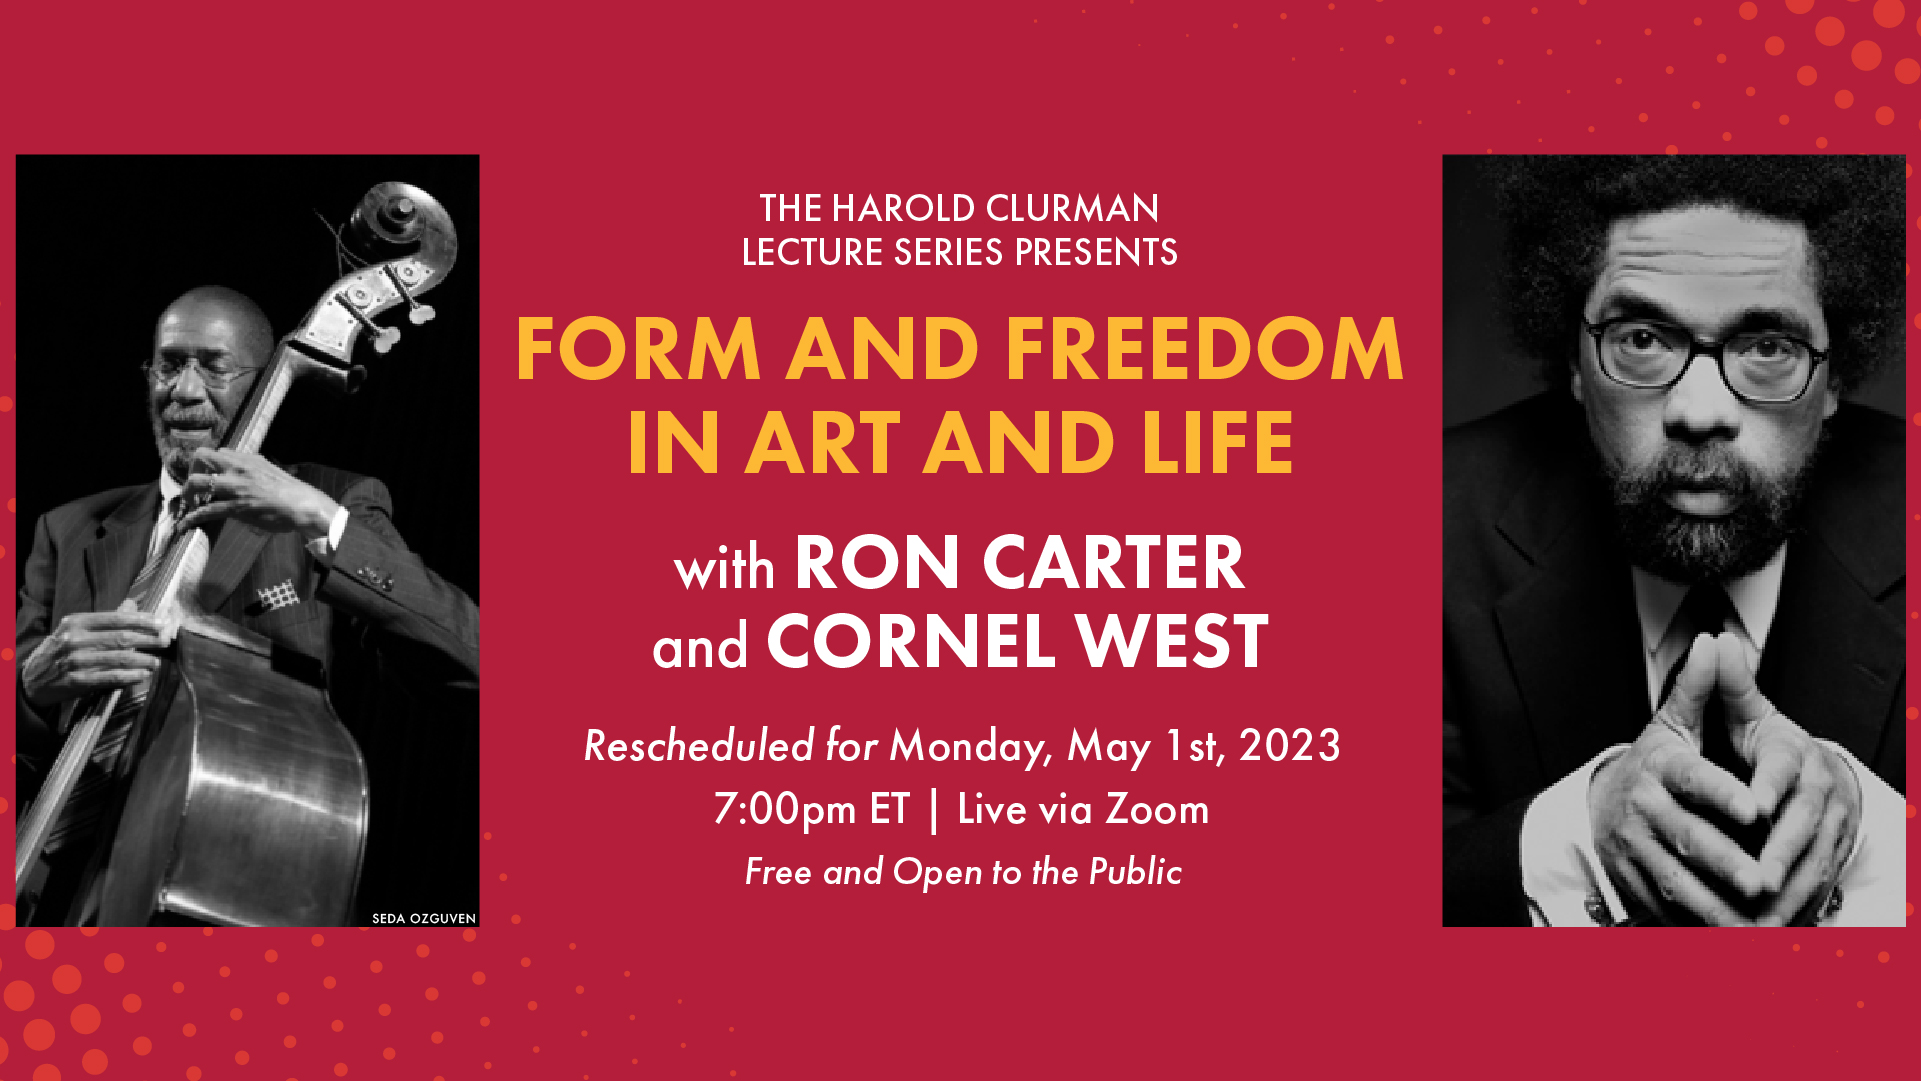 The Harold Clurman Lecture Series Presents: Form and Freedom in Art and Life with Ron Carter and Cornel West